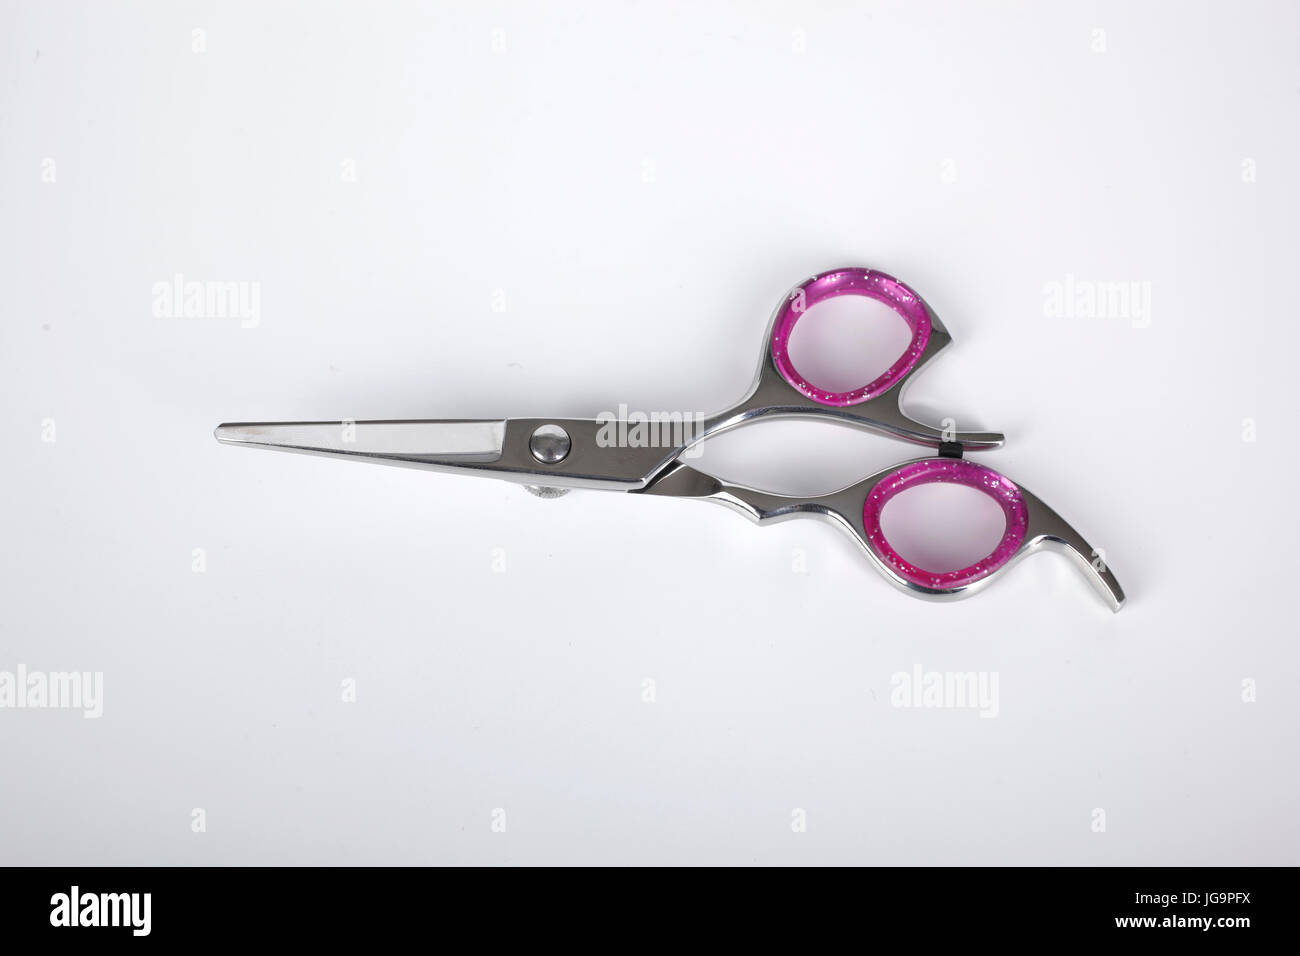 Professional haircutting scissors isolated on white background. Silver metal, stainless steel scissors. Stock Photo